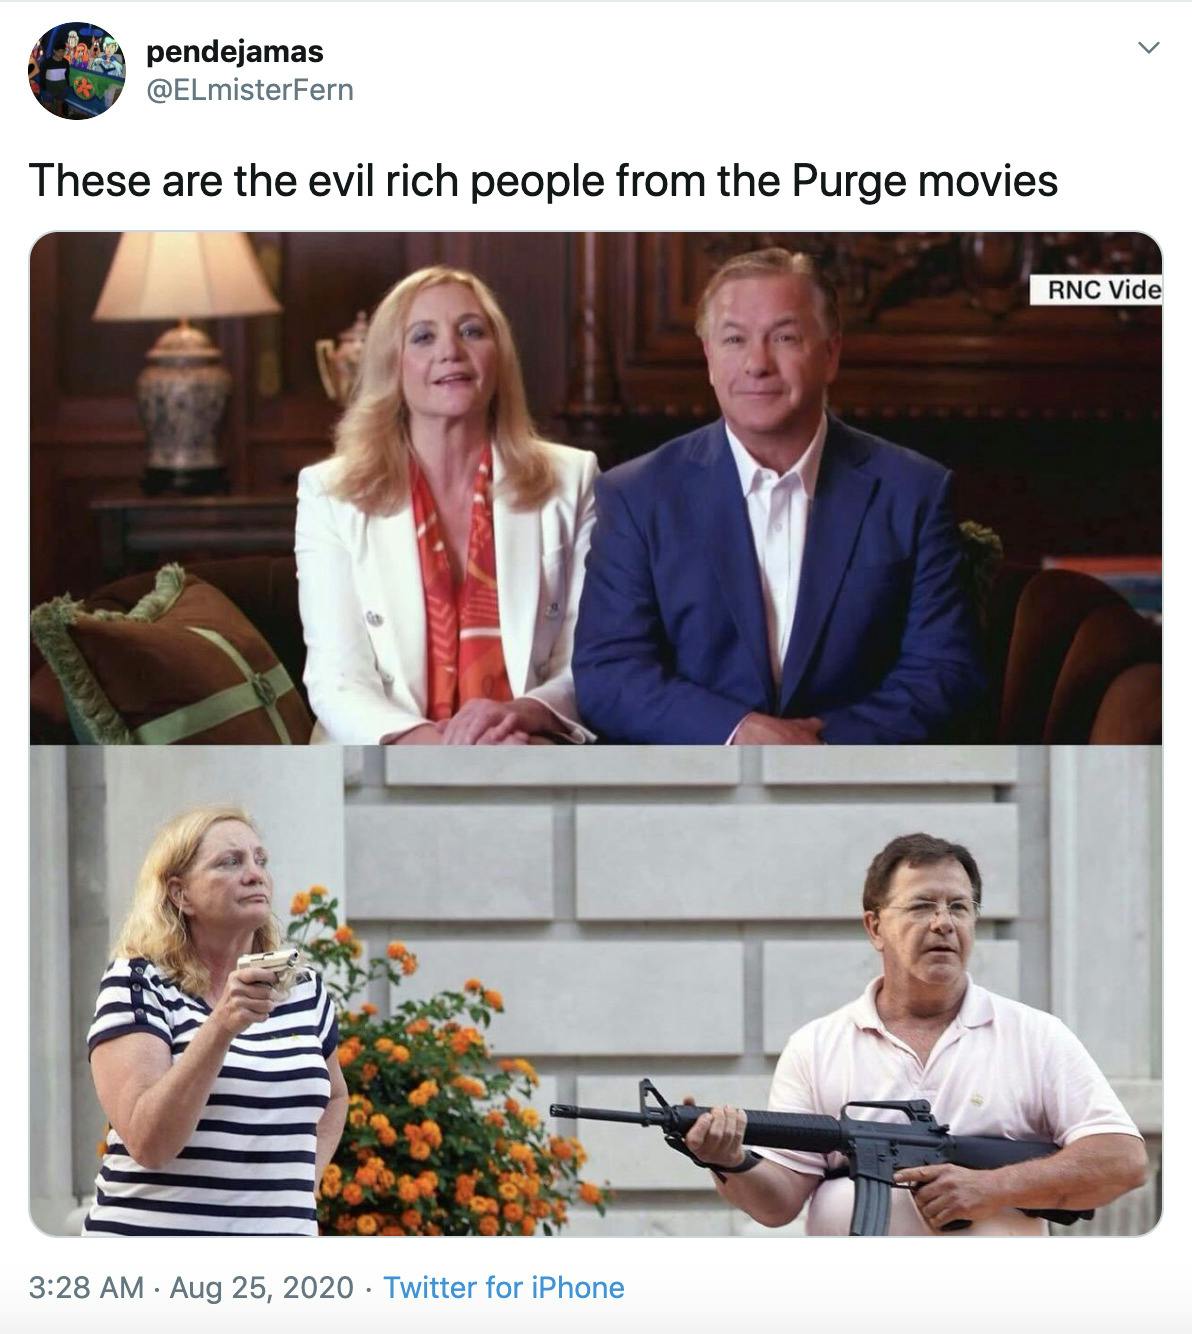 "These are the evil rich people from the Purge movies" Image of Mark and Patricia McCloskey from the RNC on top of image of them pointing guns at protesters